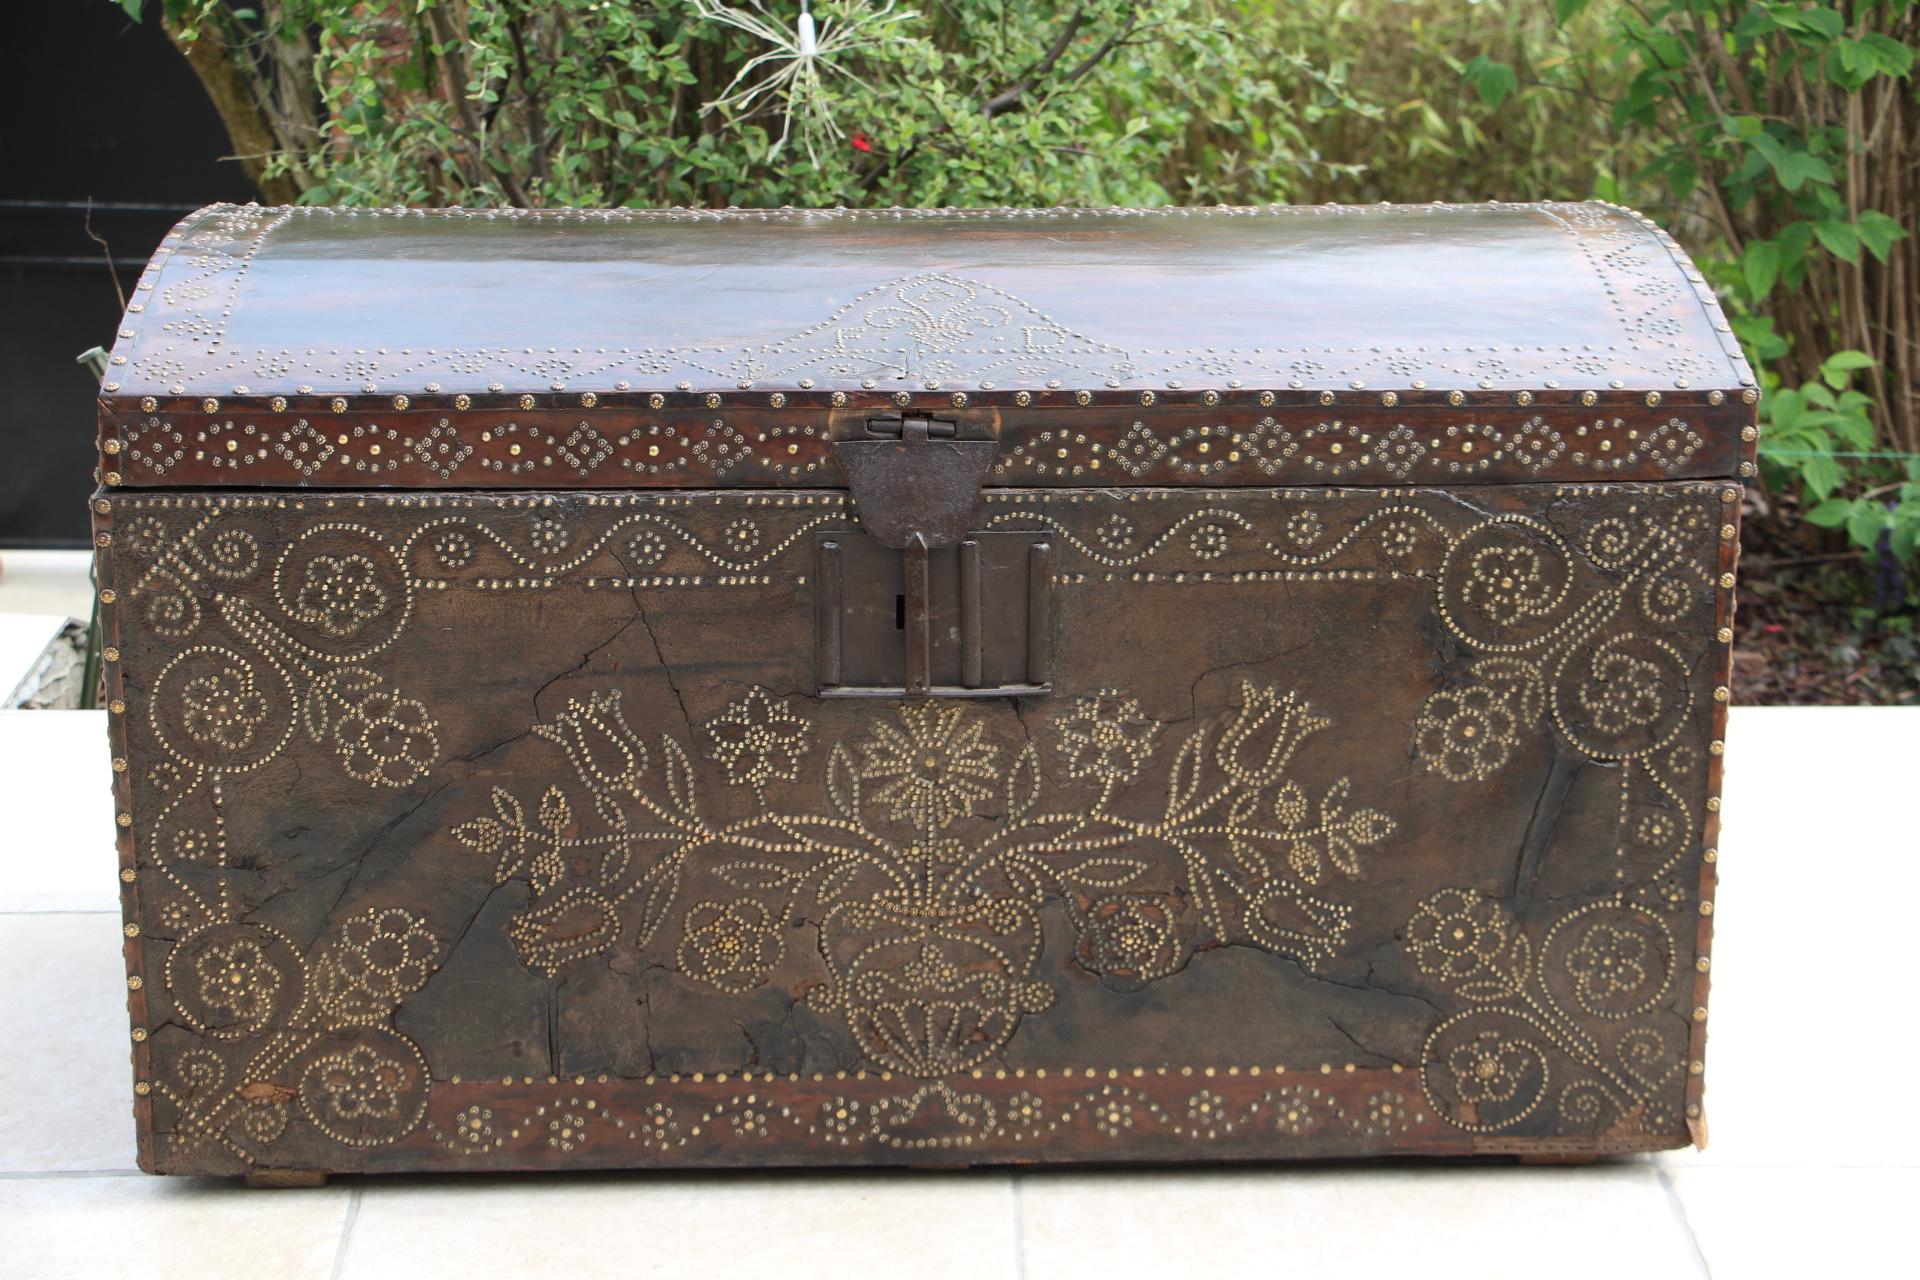 Very unique piece,this 17th century trunk features brown leather and a wonderful job of flowers drawing made with little brass studs.
It has got 2 iron side handles and an iron lock but no key. Iron hinges.
It is a large and unusual piece that